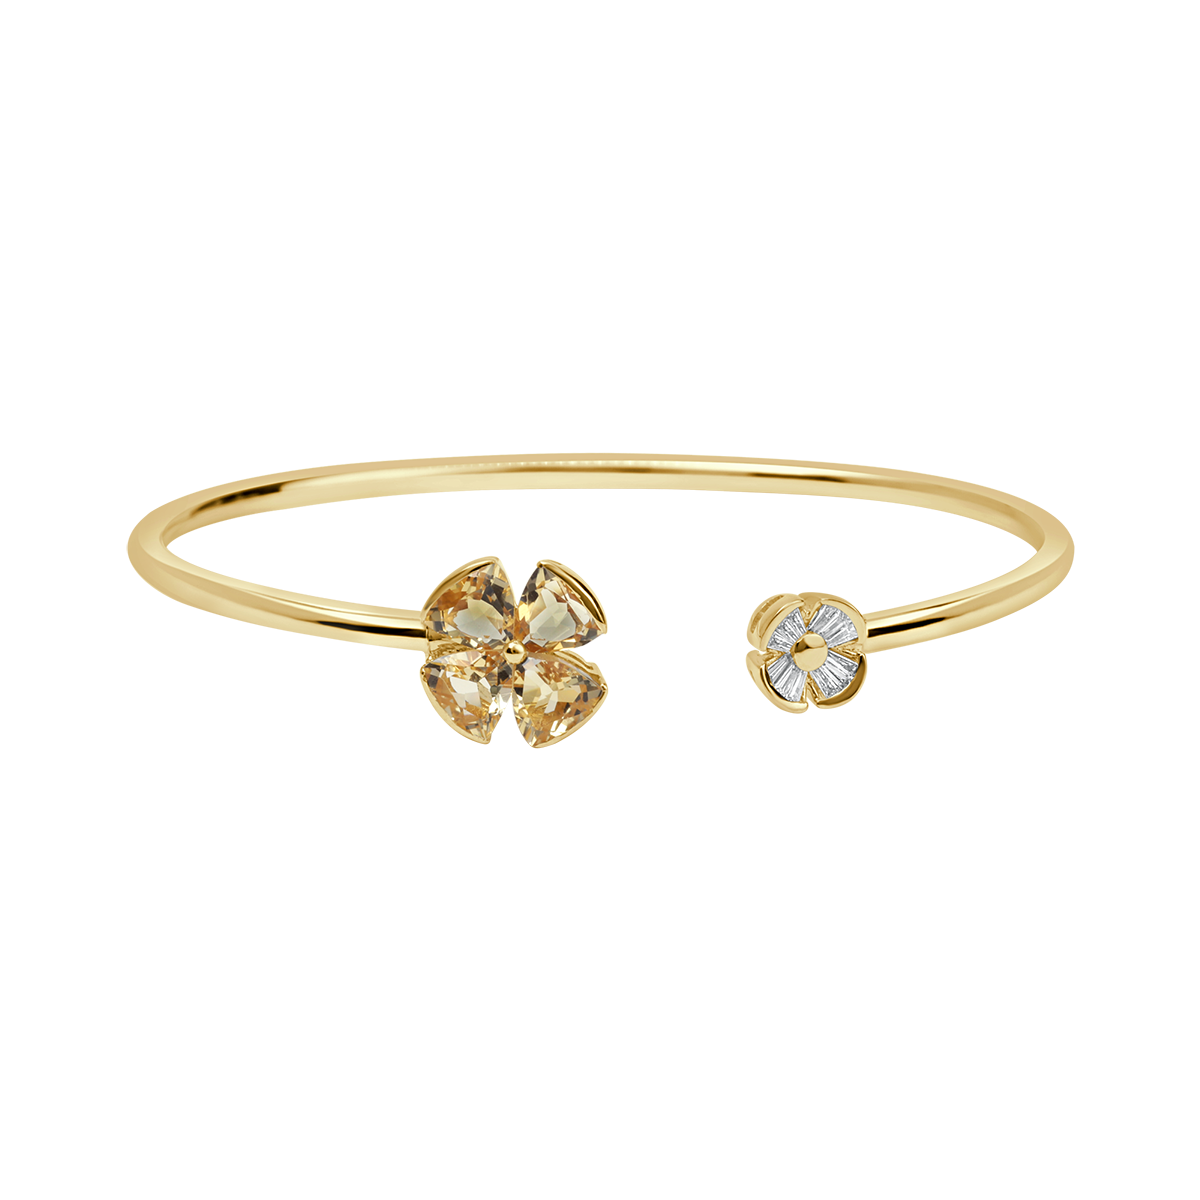 Butterfly Trilliant & Diamond Bangle In 18 K Rose Gold Rosequartz From Orchid Collection